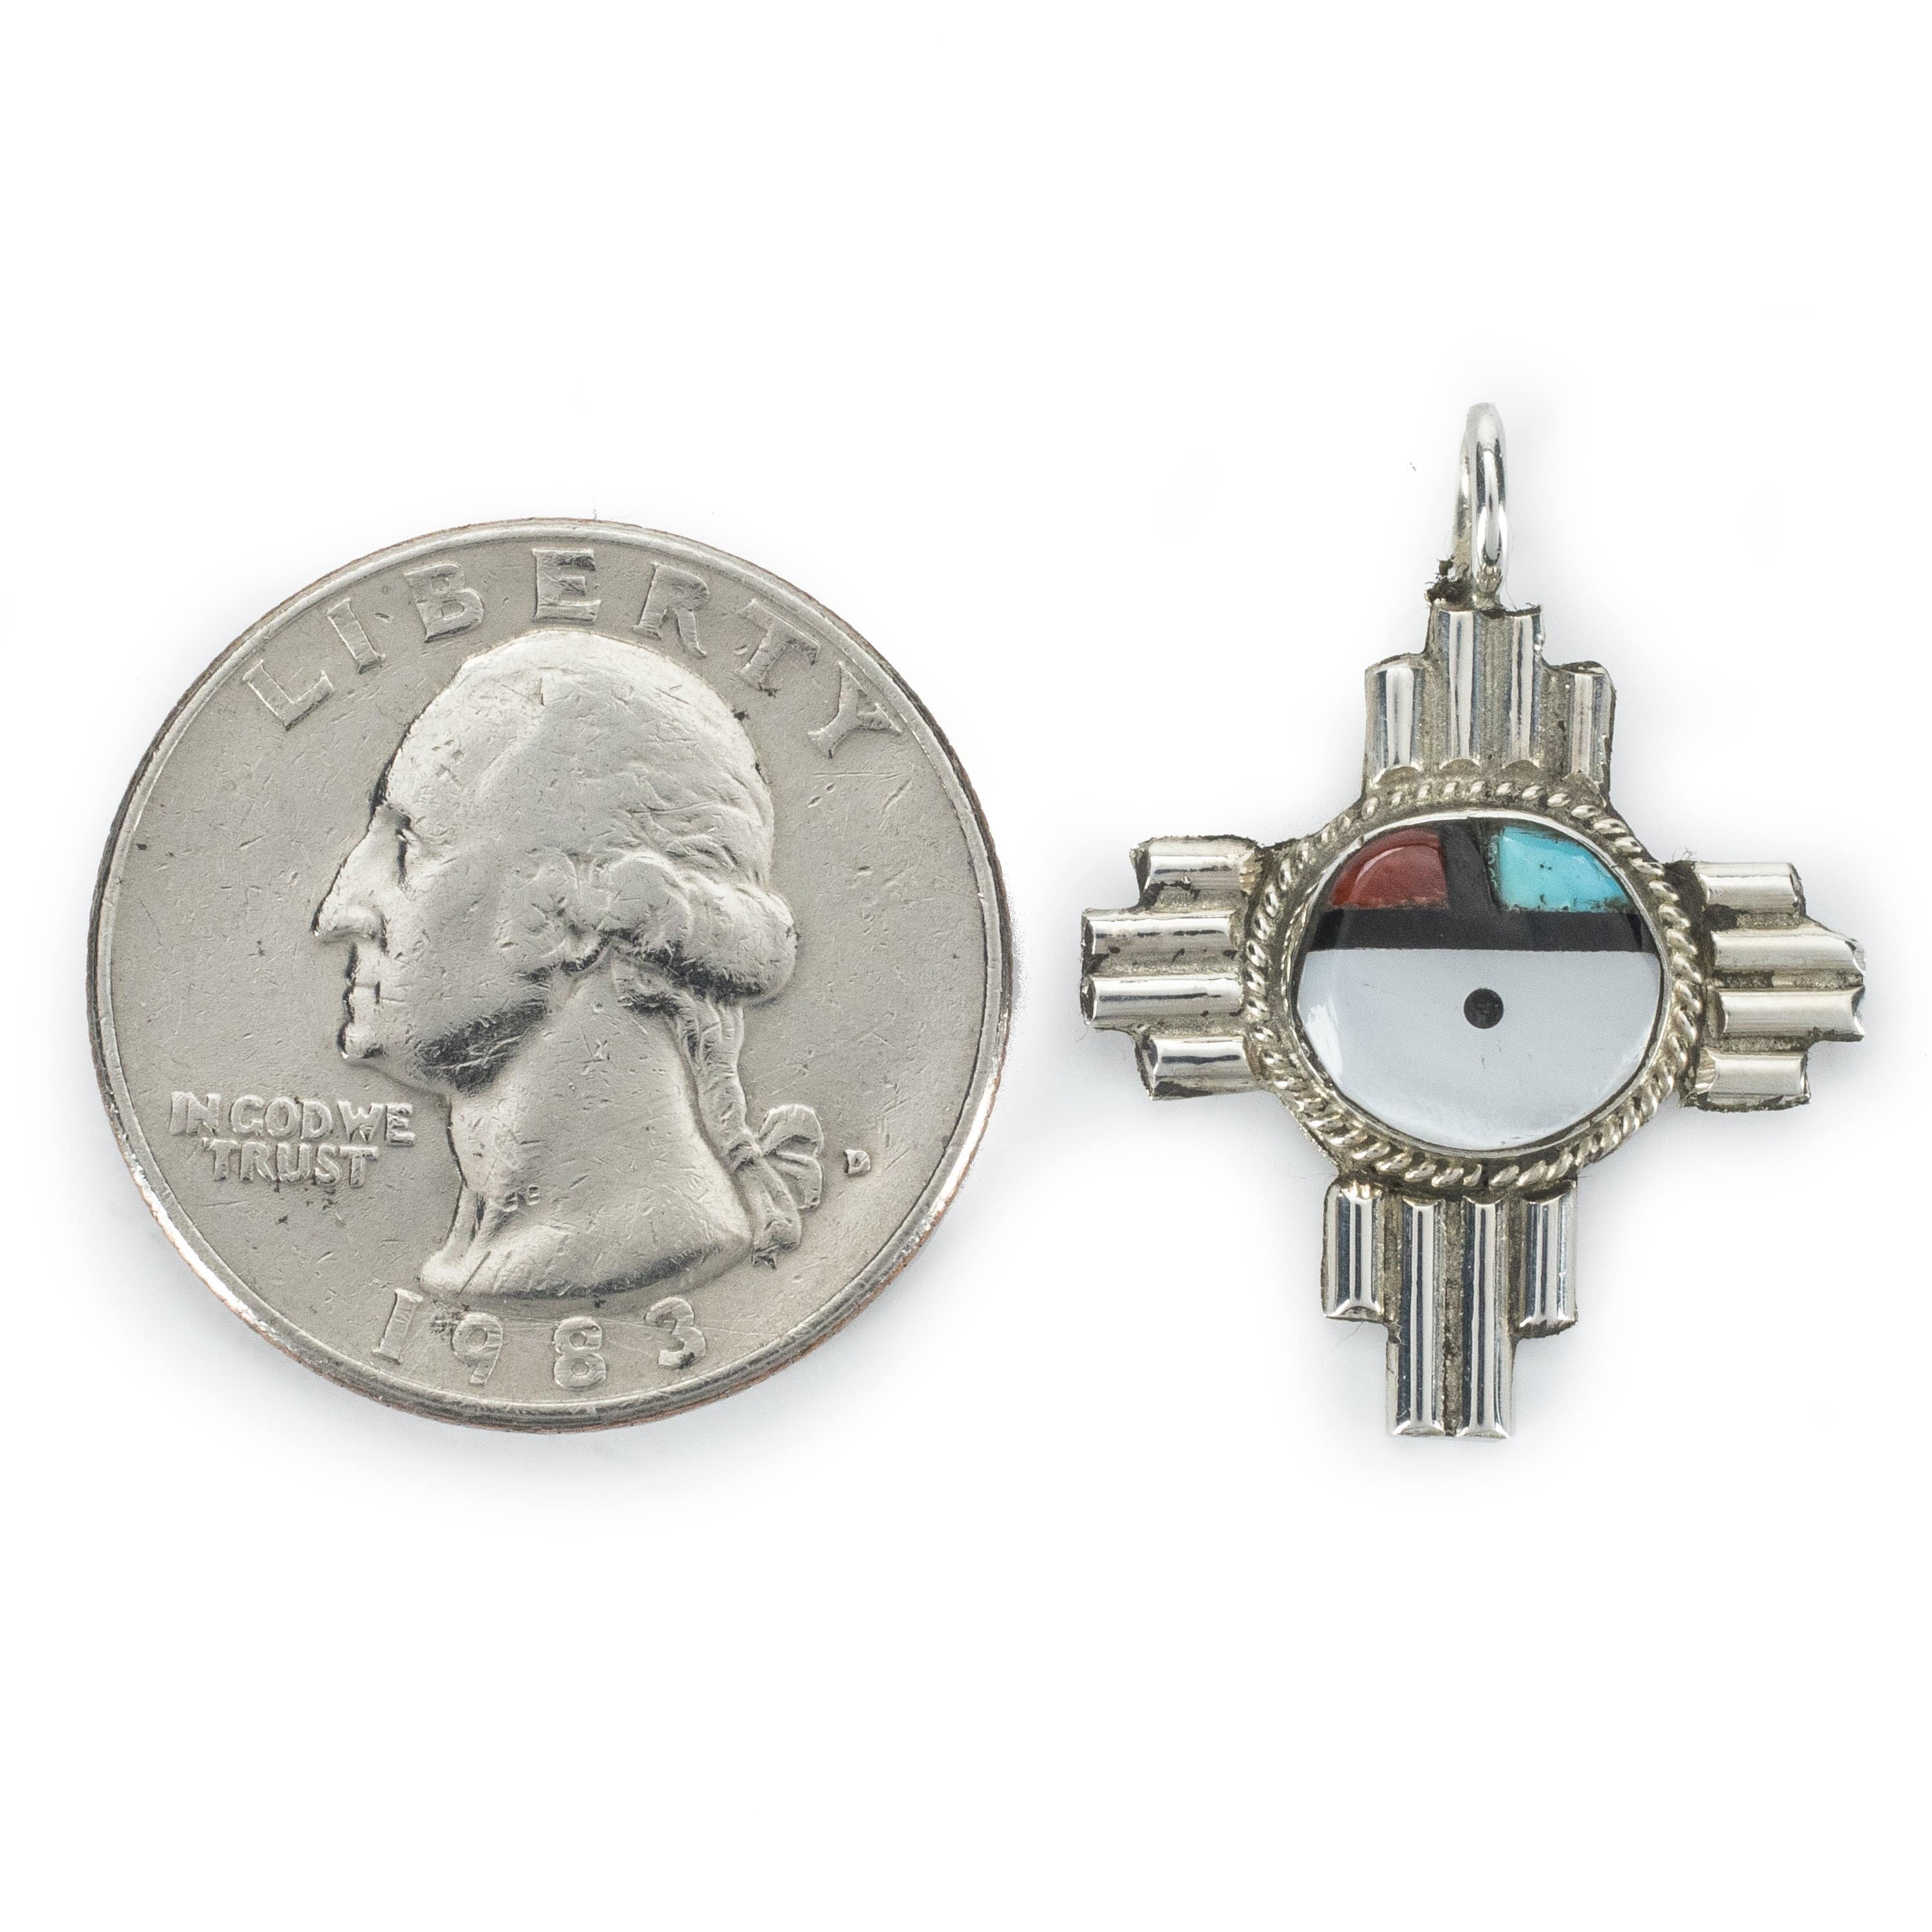 Kalifano Native American Jewelry C. Cheama Mother of Pearl, Turquoise, Jet, Coral Zuni USA Native American Made 925 Sterling Silver Pendant NAN200.002